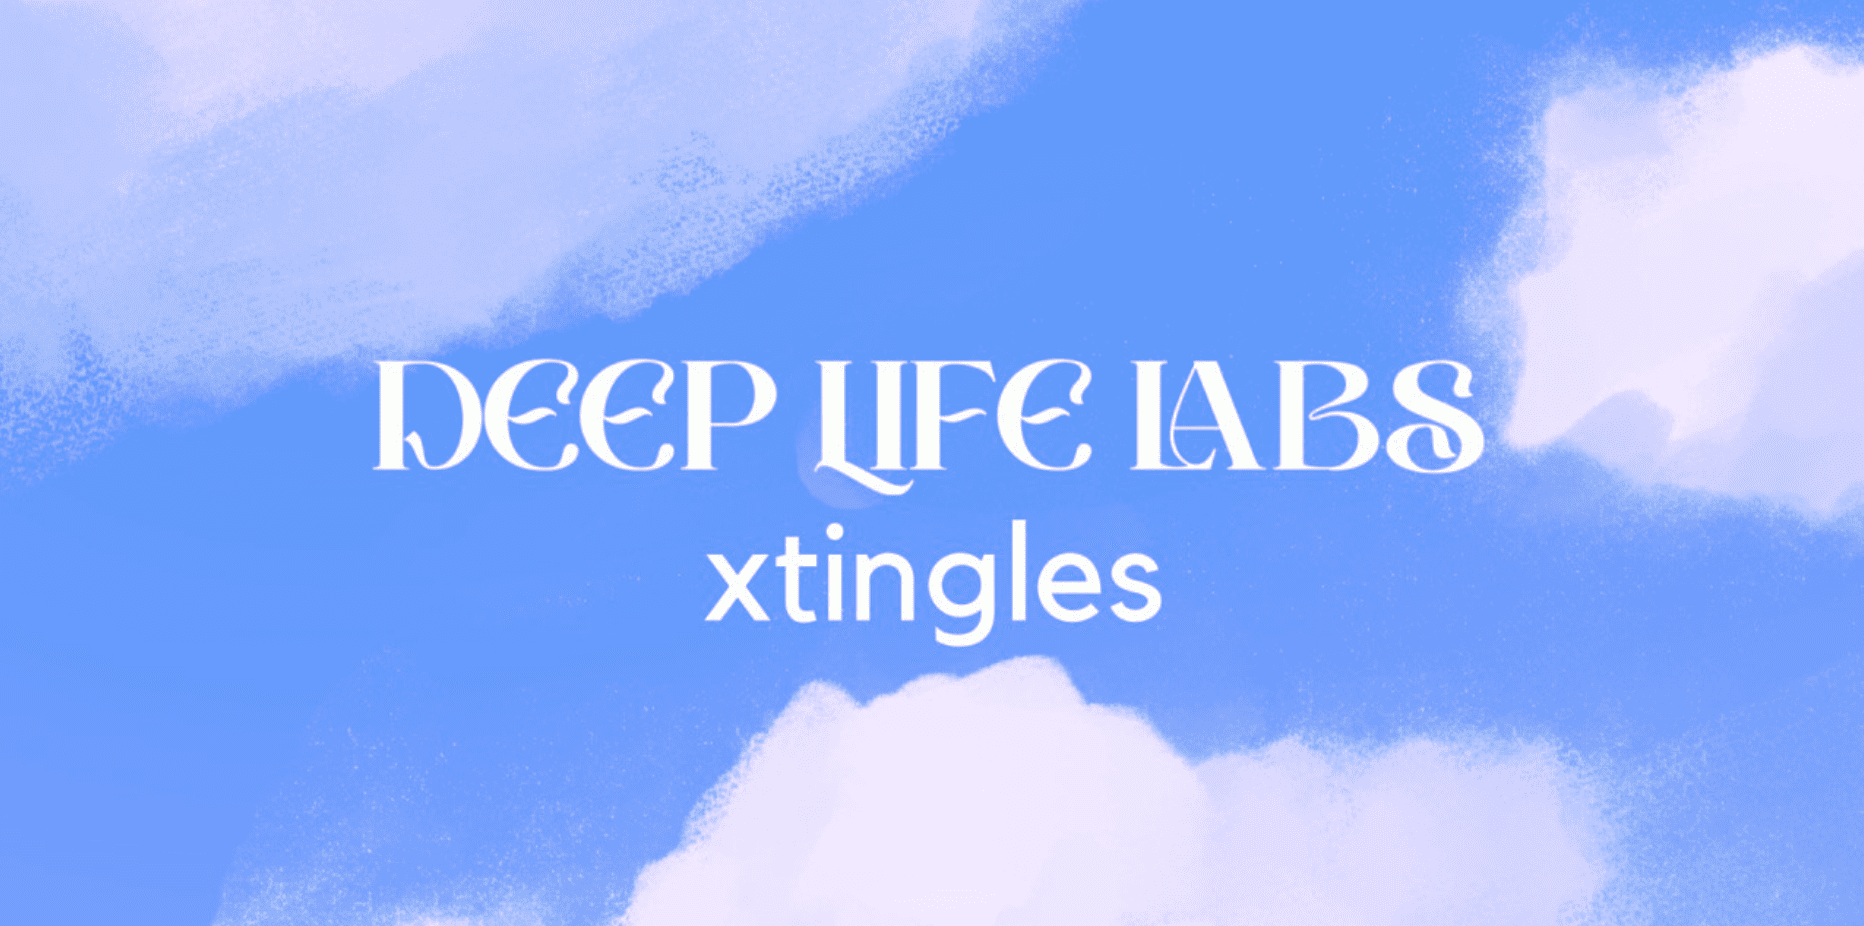 Xtingles-expands-its-effort-to-bring-wellness-into-web3-through-deep-life-labs